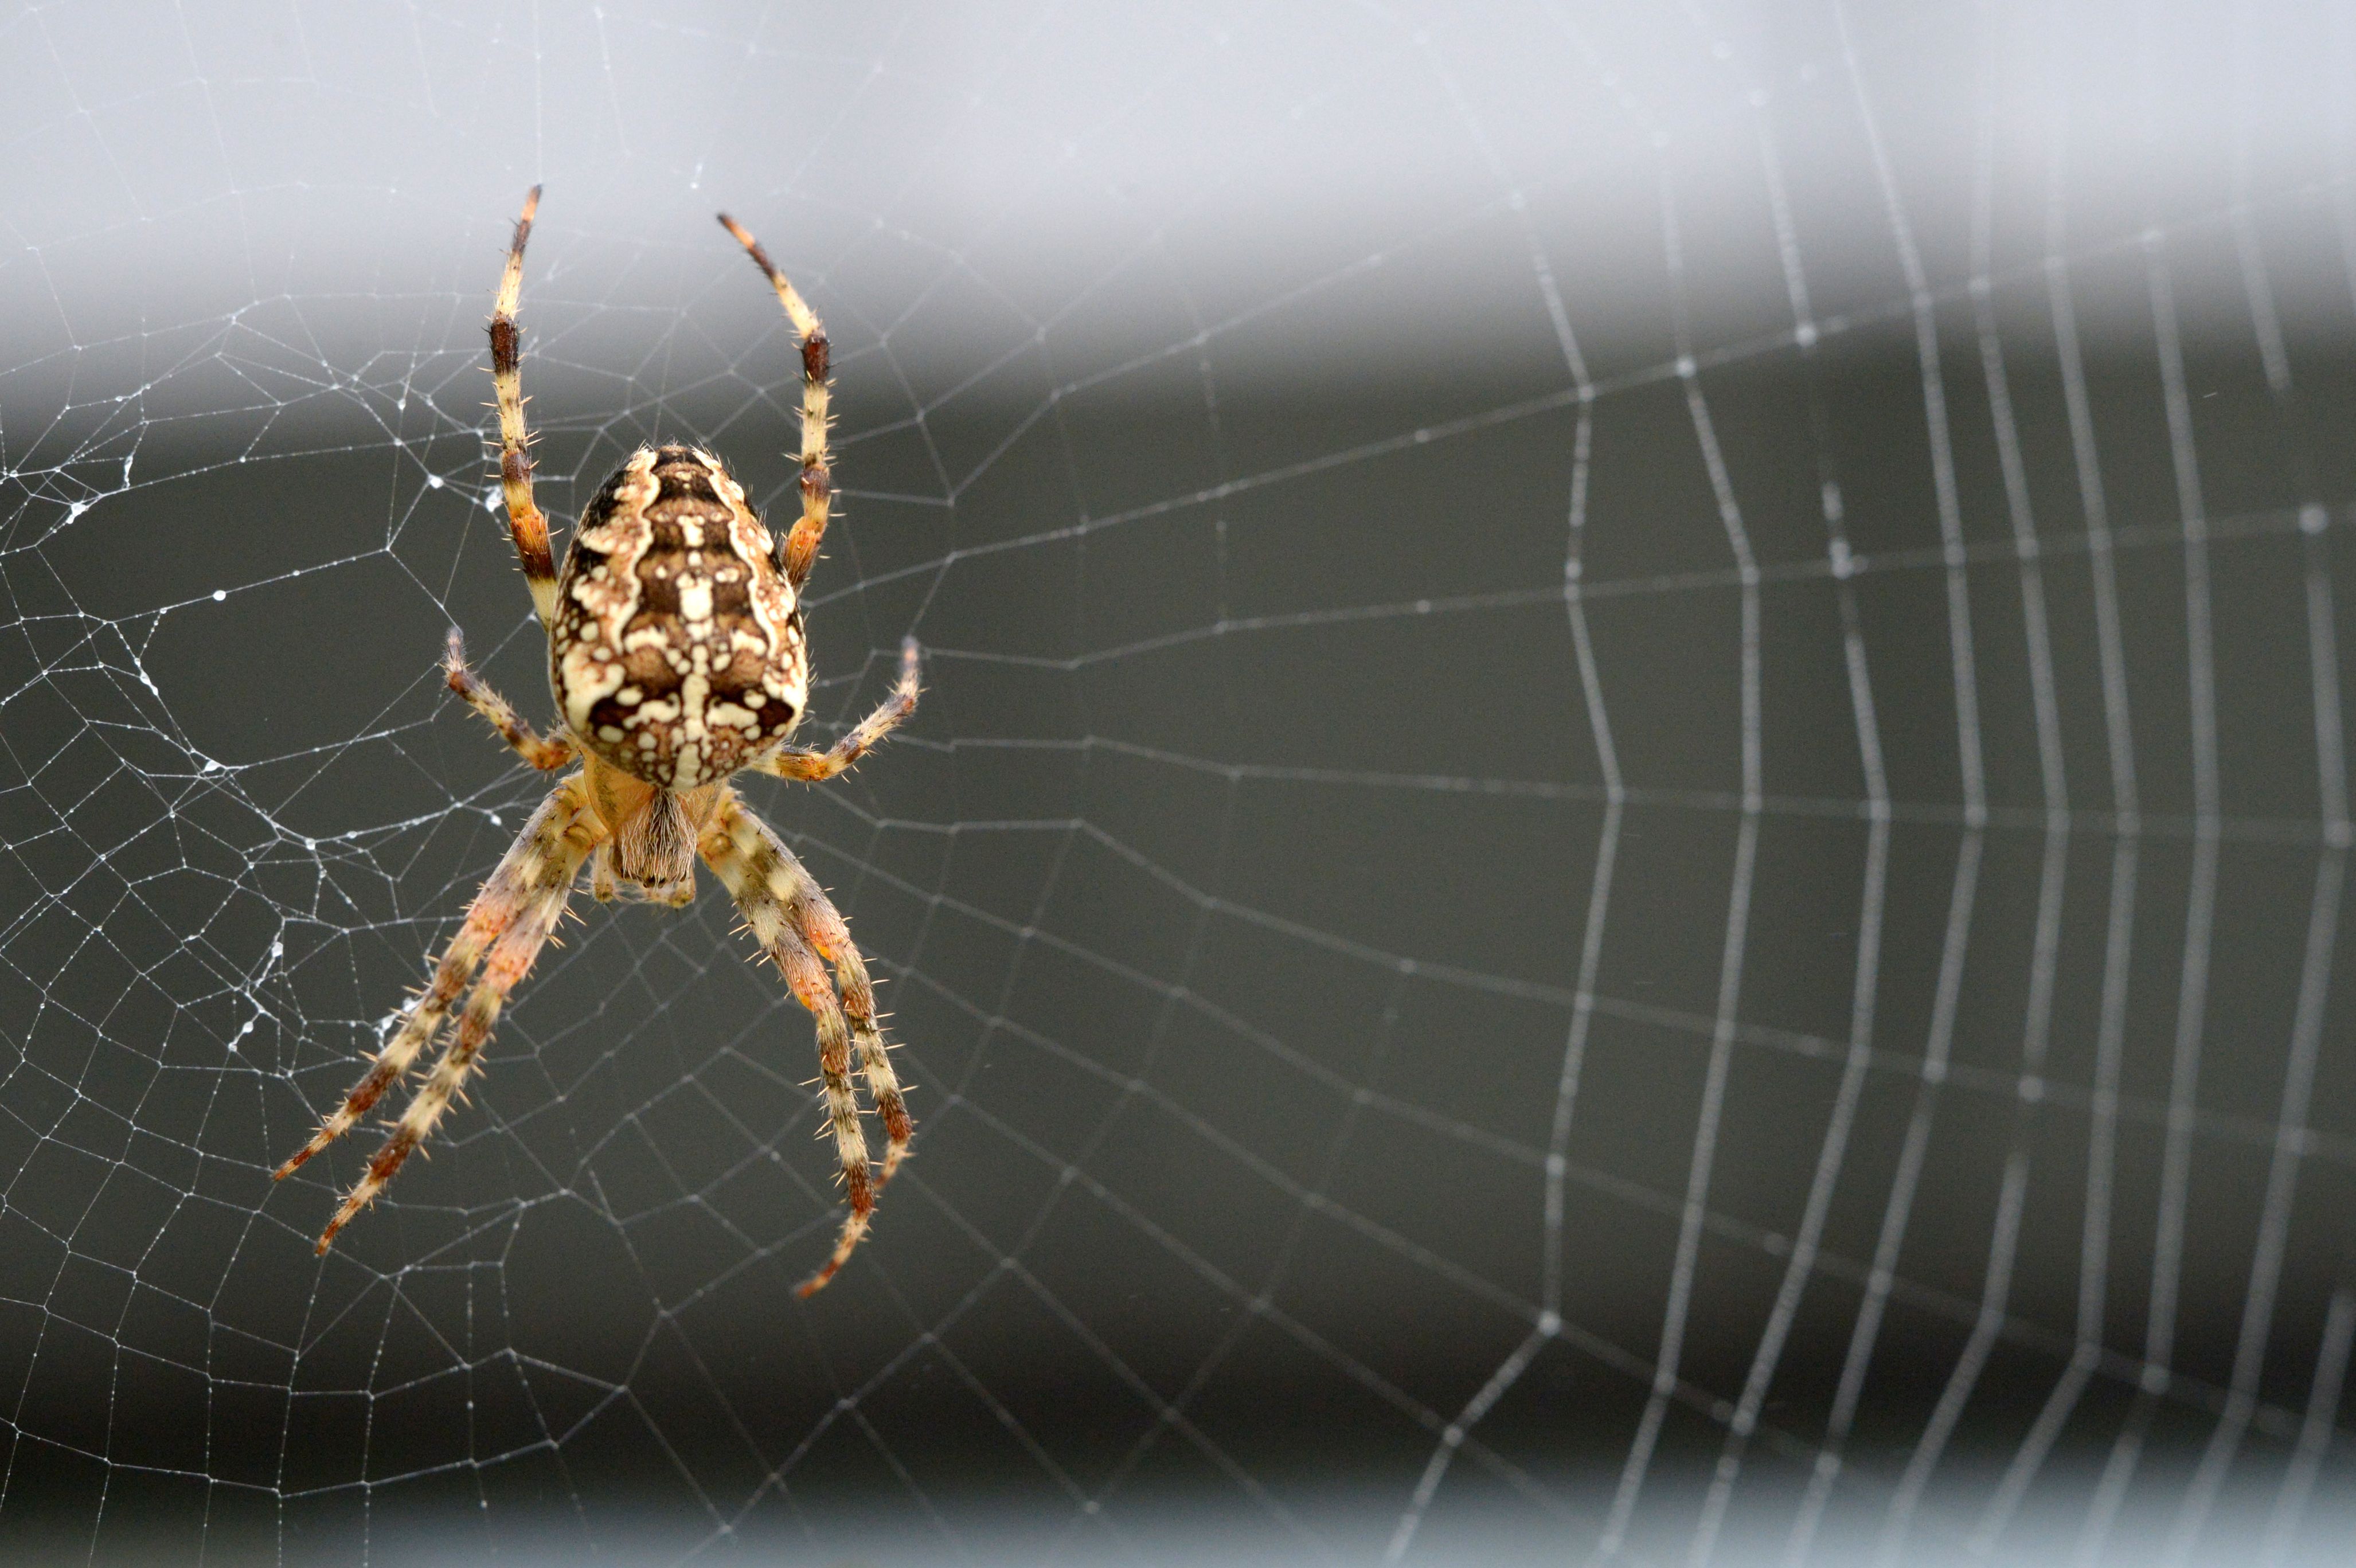 What shape web does a spider spin in space?